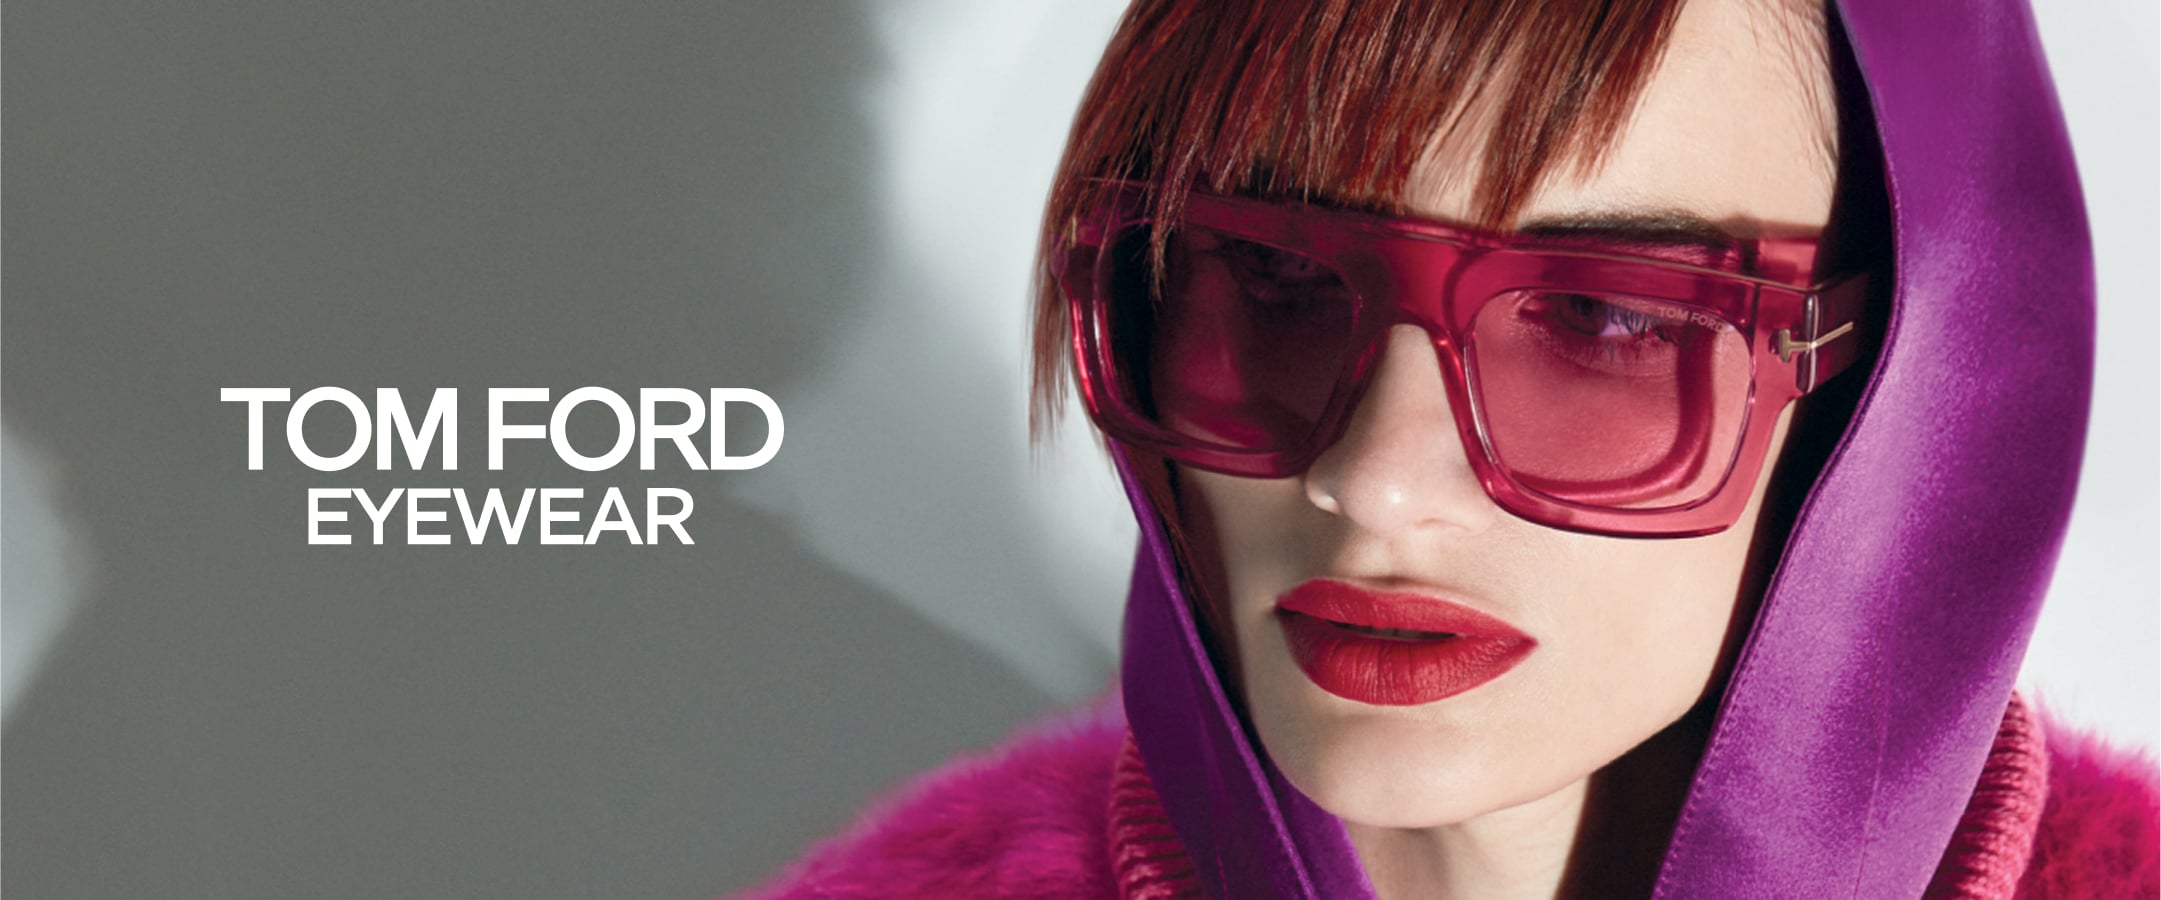 Tom Ford 4 Collection Image